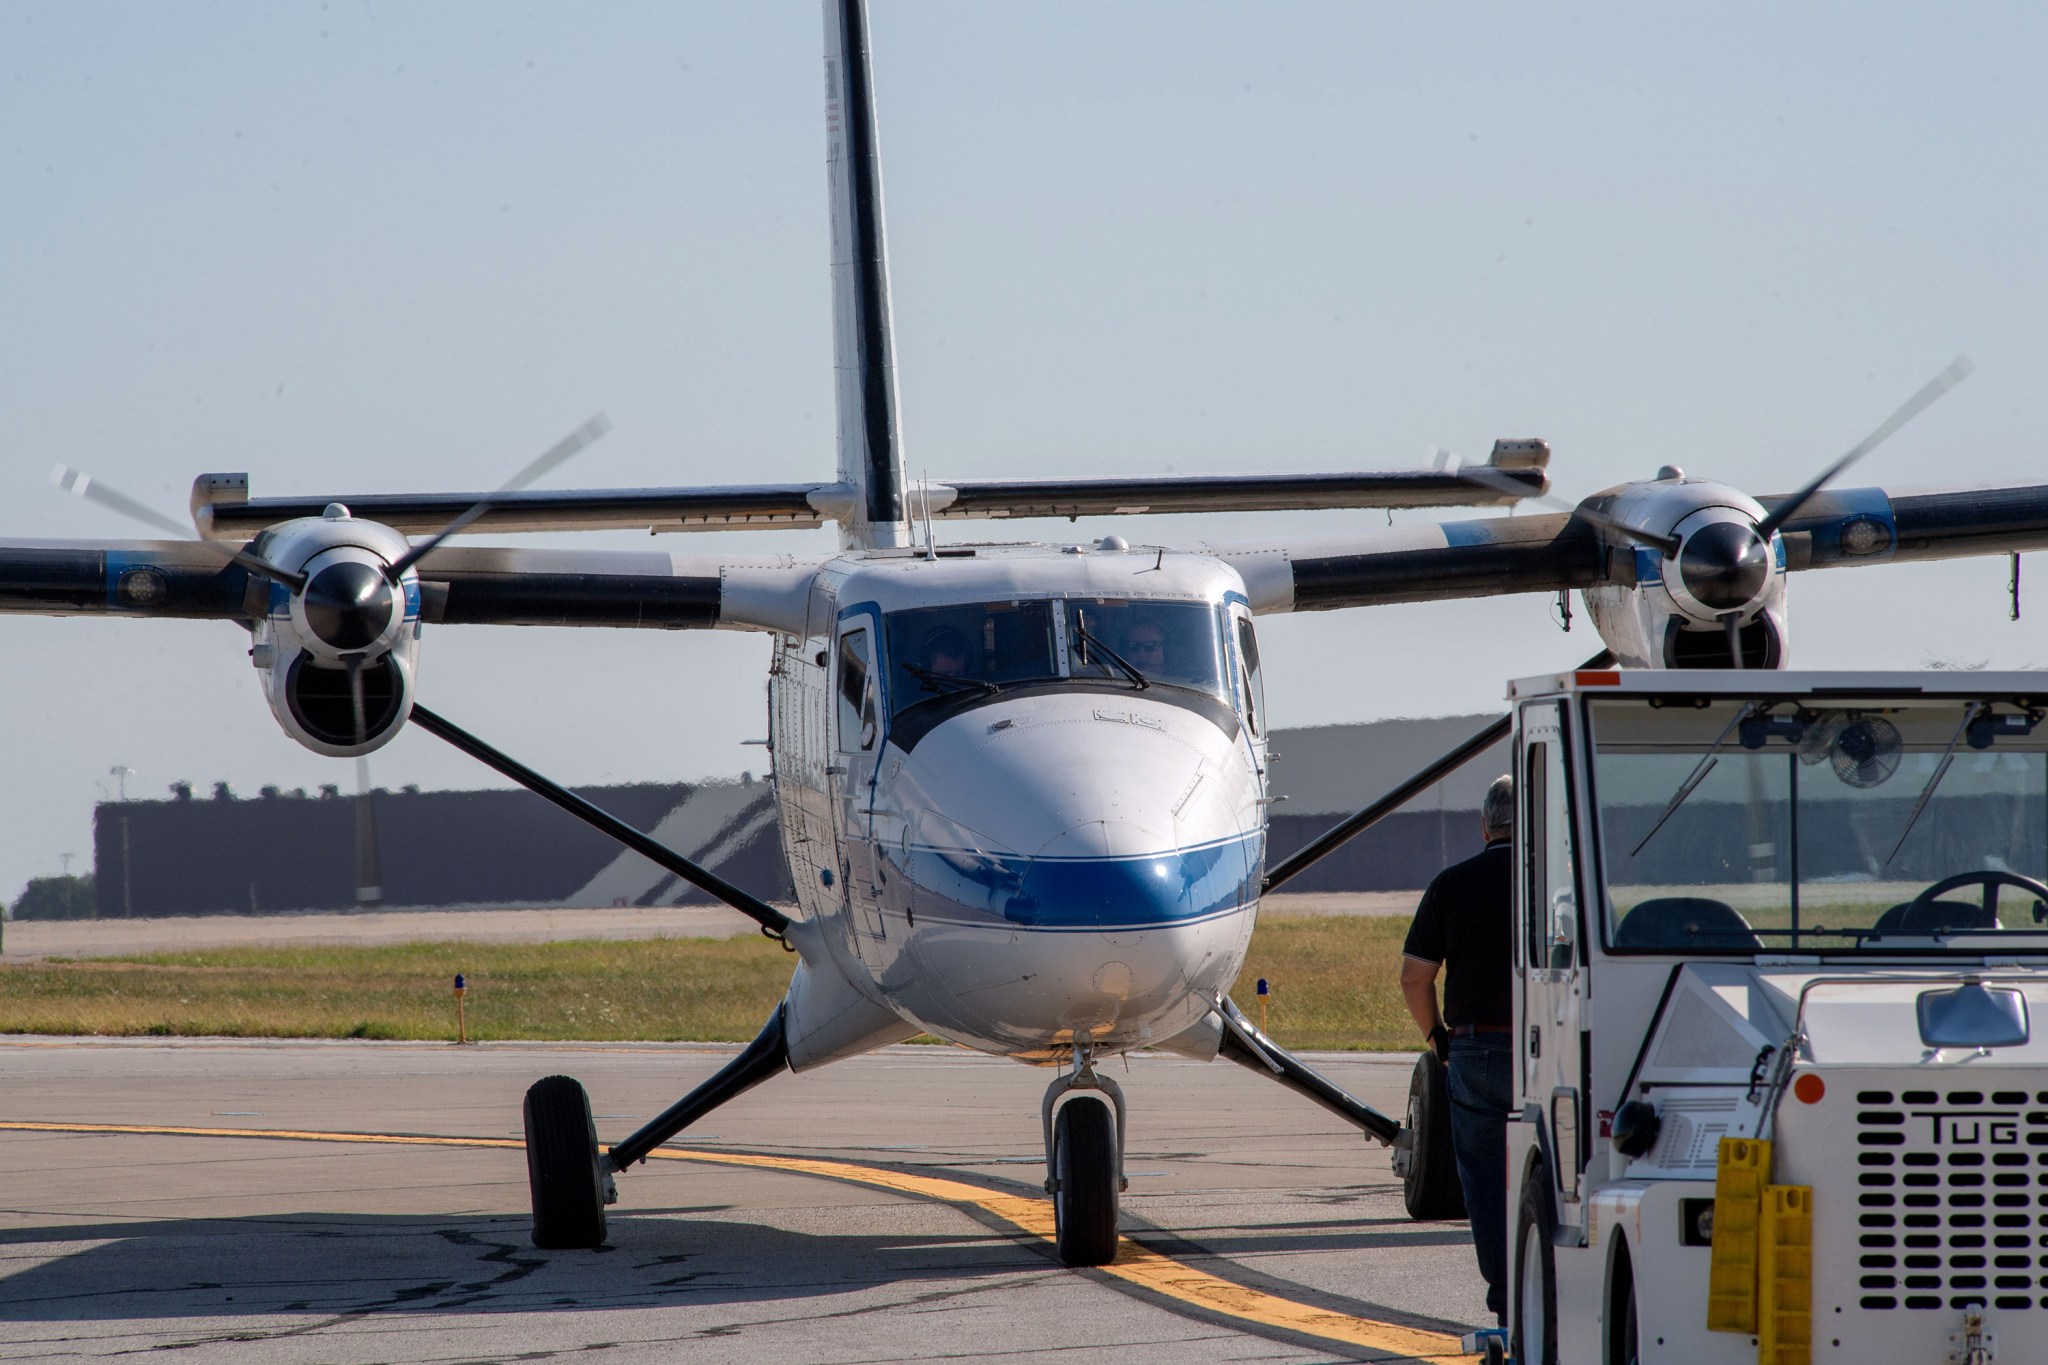 Front view of a twin engine aircraft right behind a service vehicle on an airport taxiway.